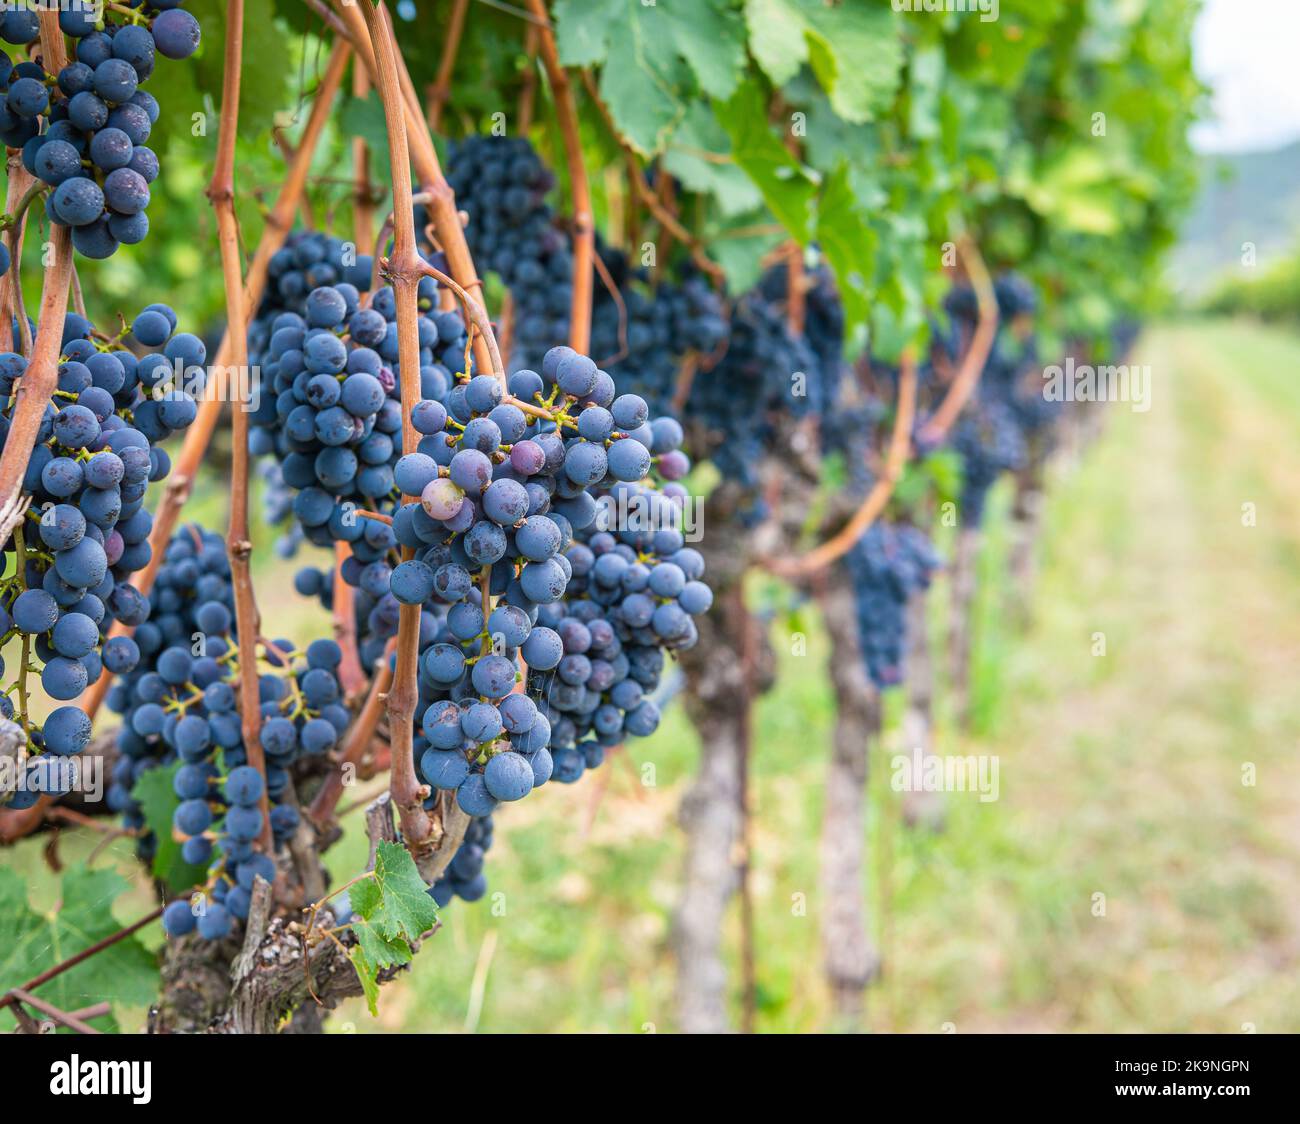 Lagrein grape variety. Lagrein is a red wine grape variety native to the valleys of South Tyrol, northern italy. Guyot Vine Training System - Italy Stock Photo